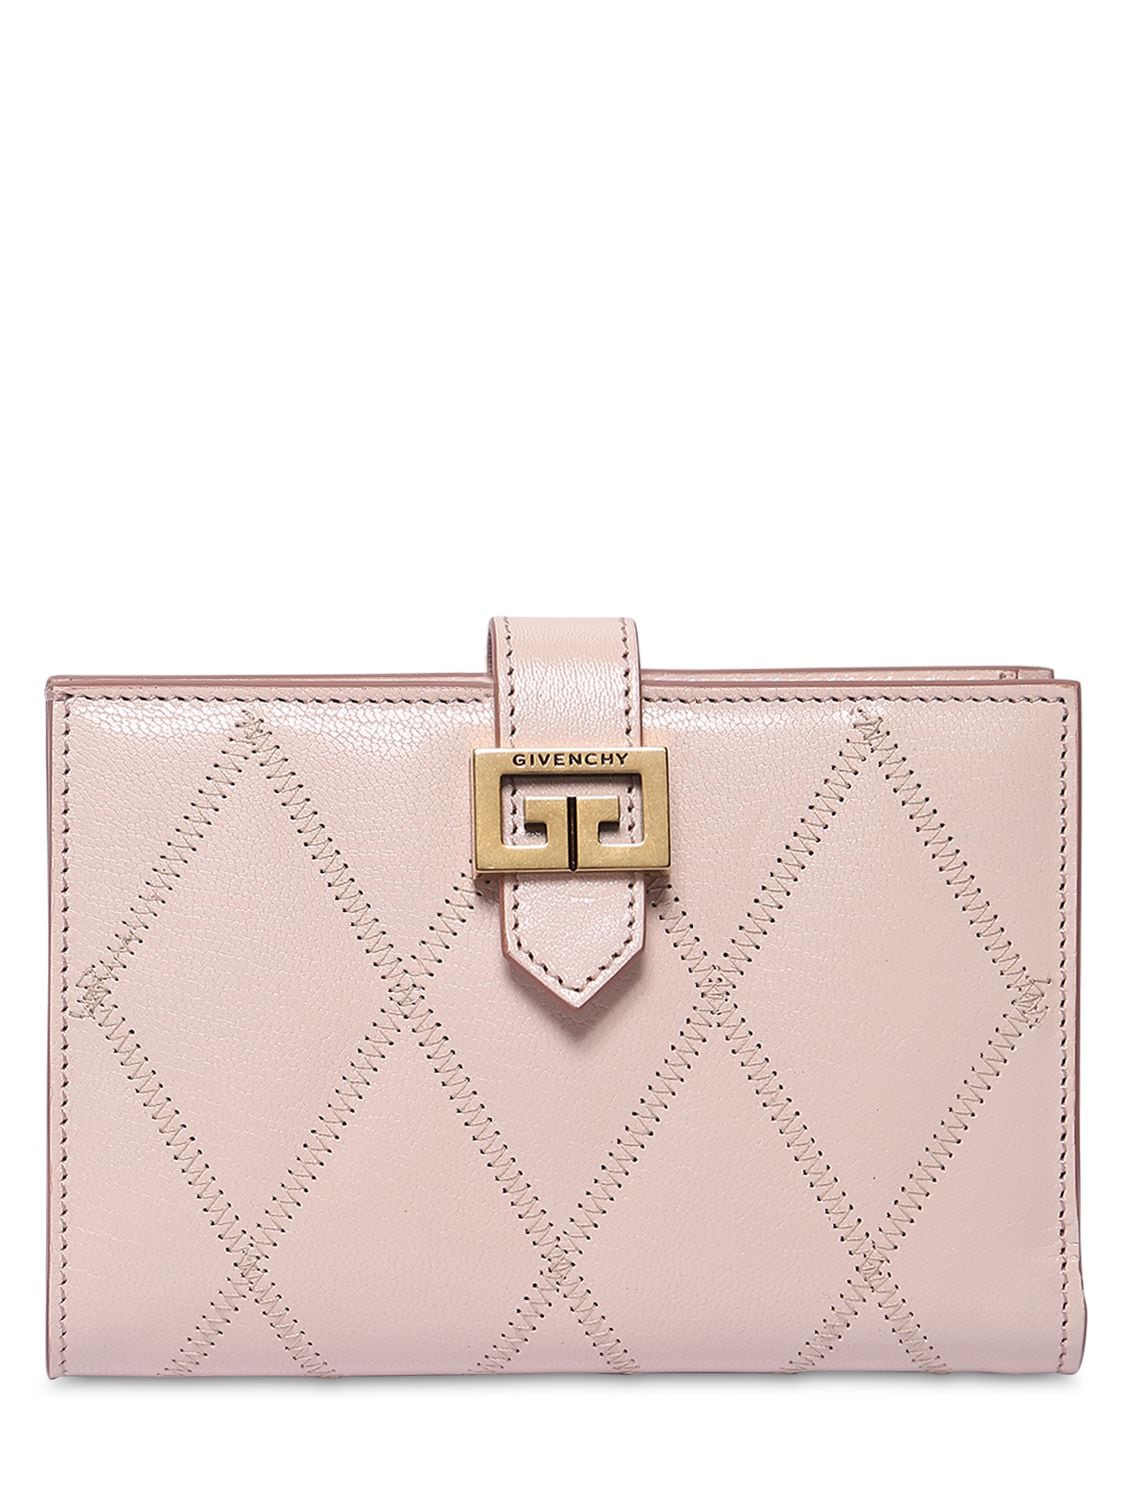 Givenchy Gv3 Quilted Leather Wallet In Light Pink